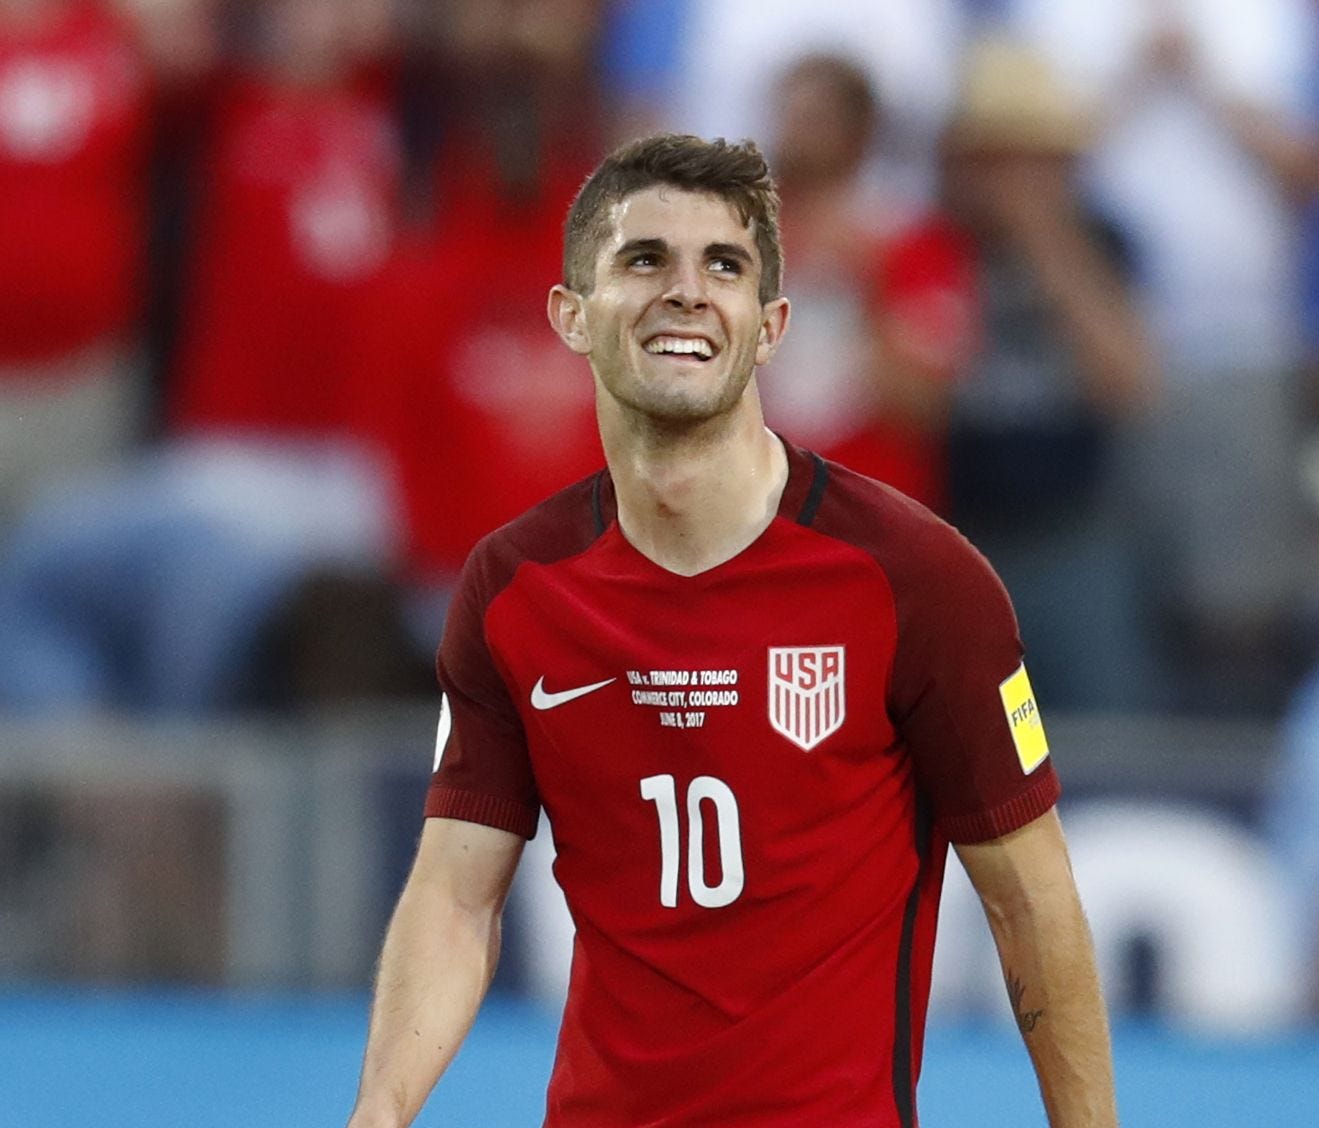 Pulisic scored two goals in the United States' win against Trinidad on Thursday.